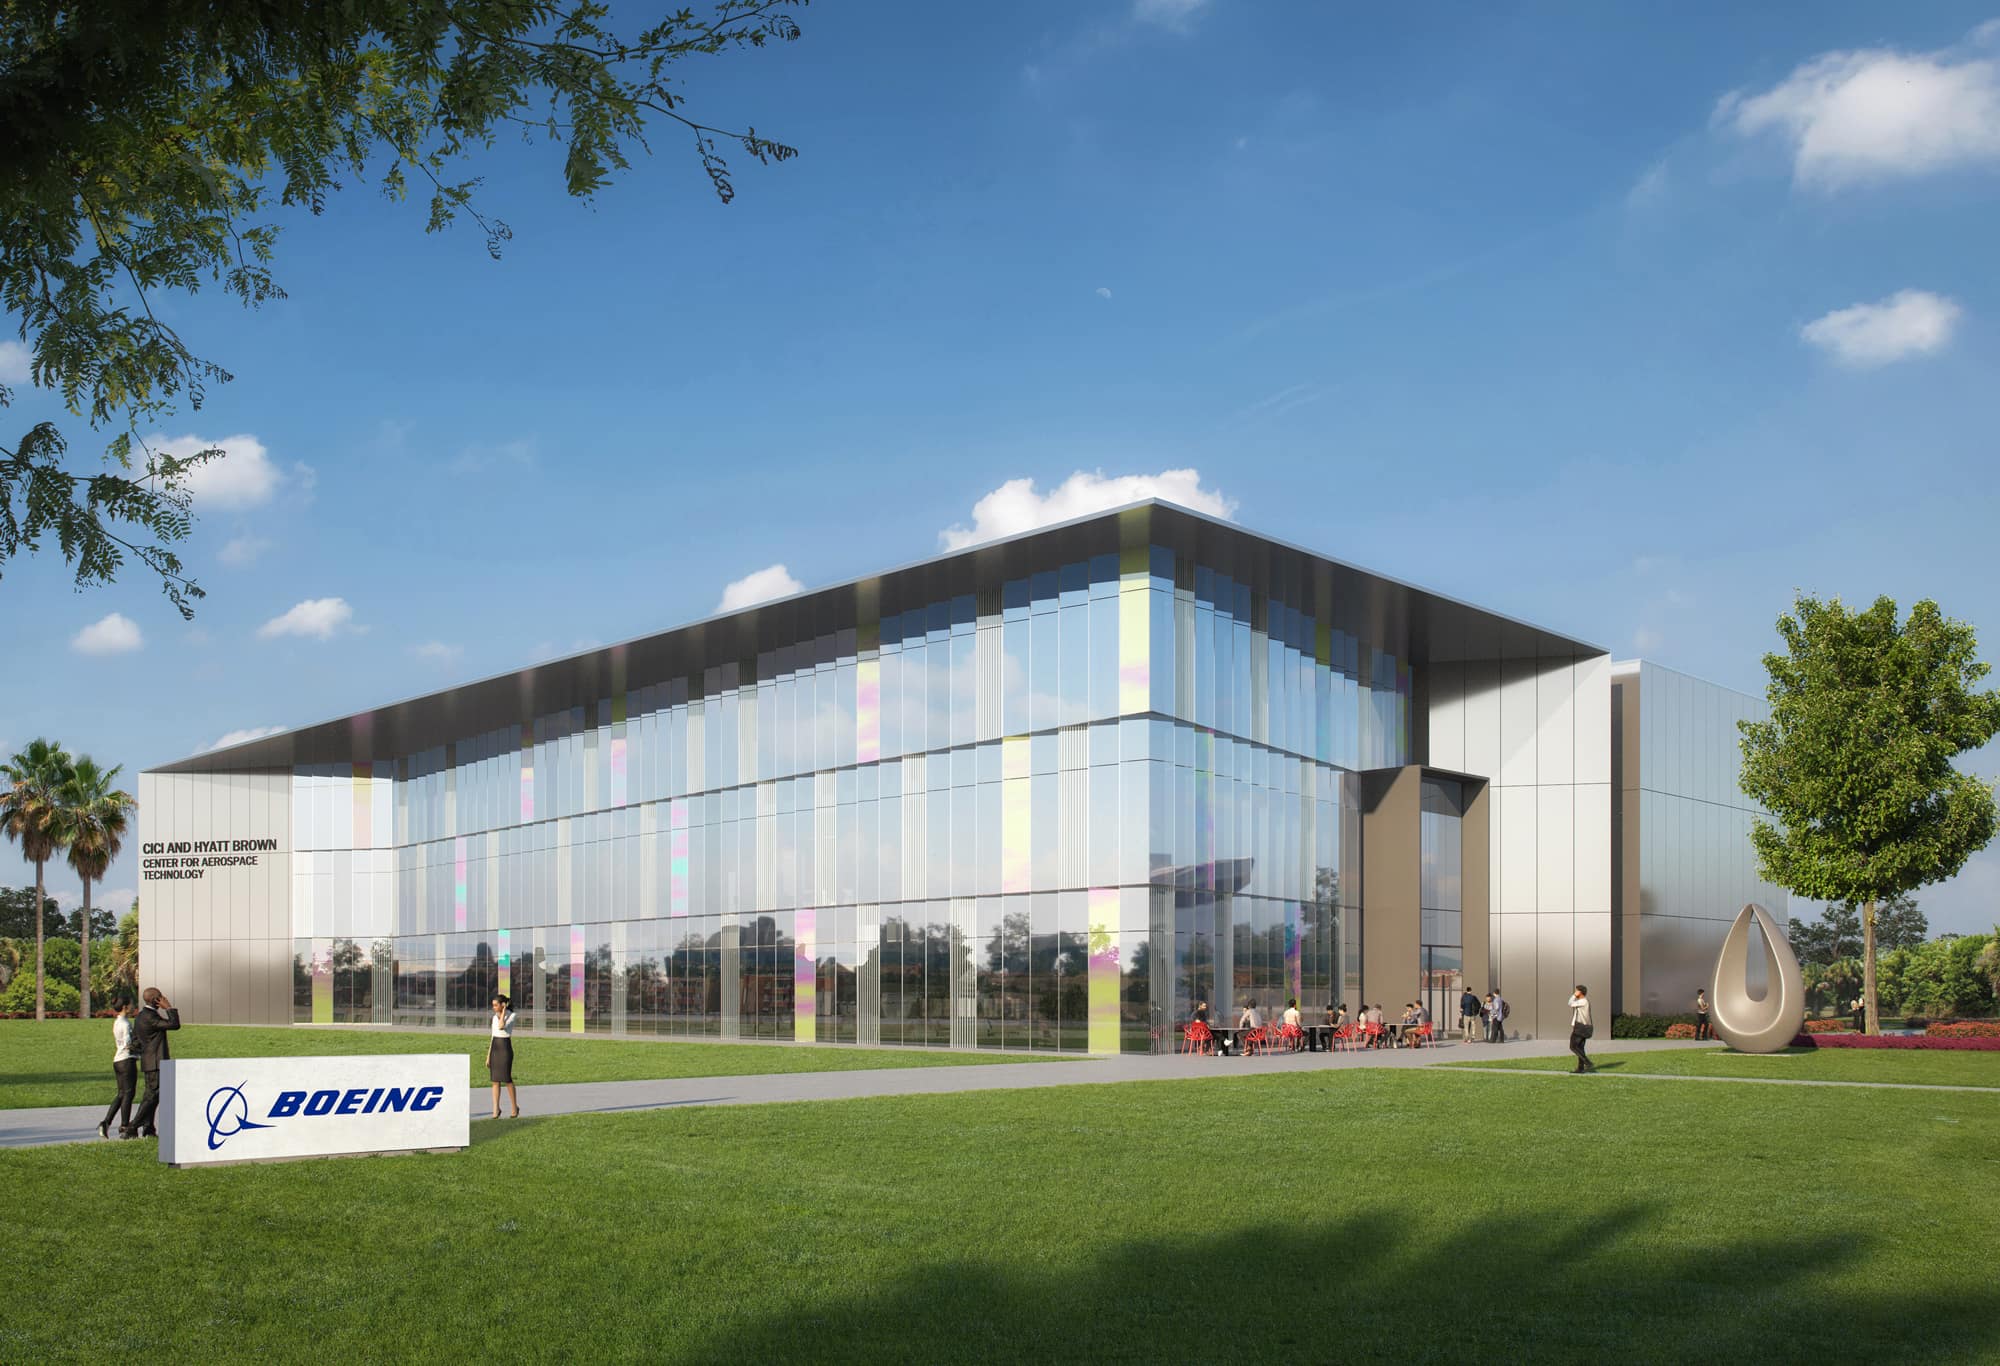 New Boeing Location at Embry-Riddle Will Bring 400 High-Paying Jobs to Florida